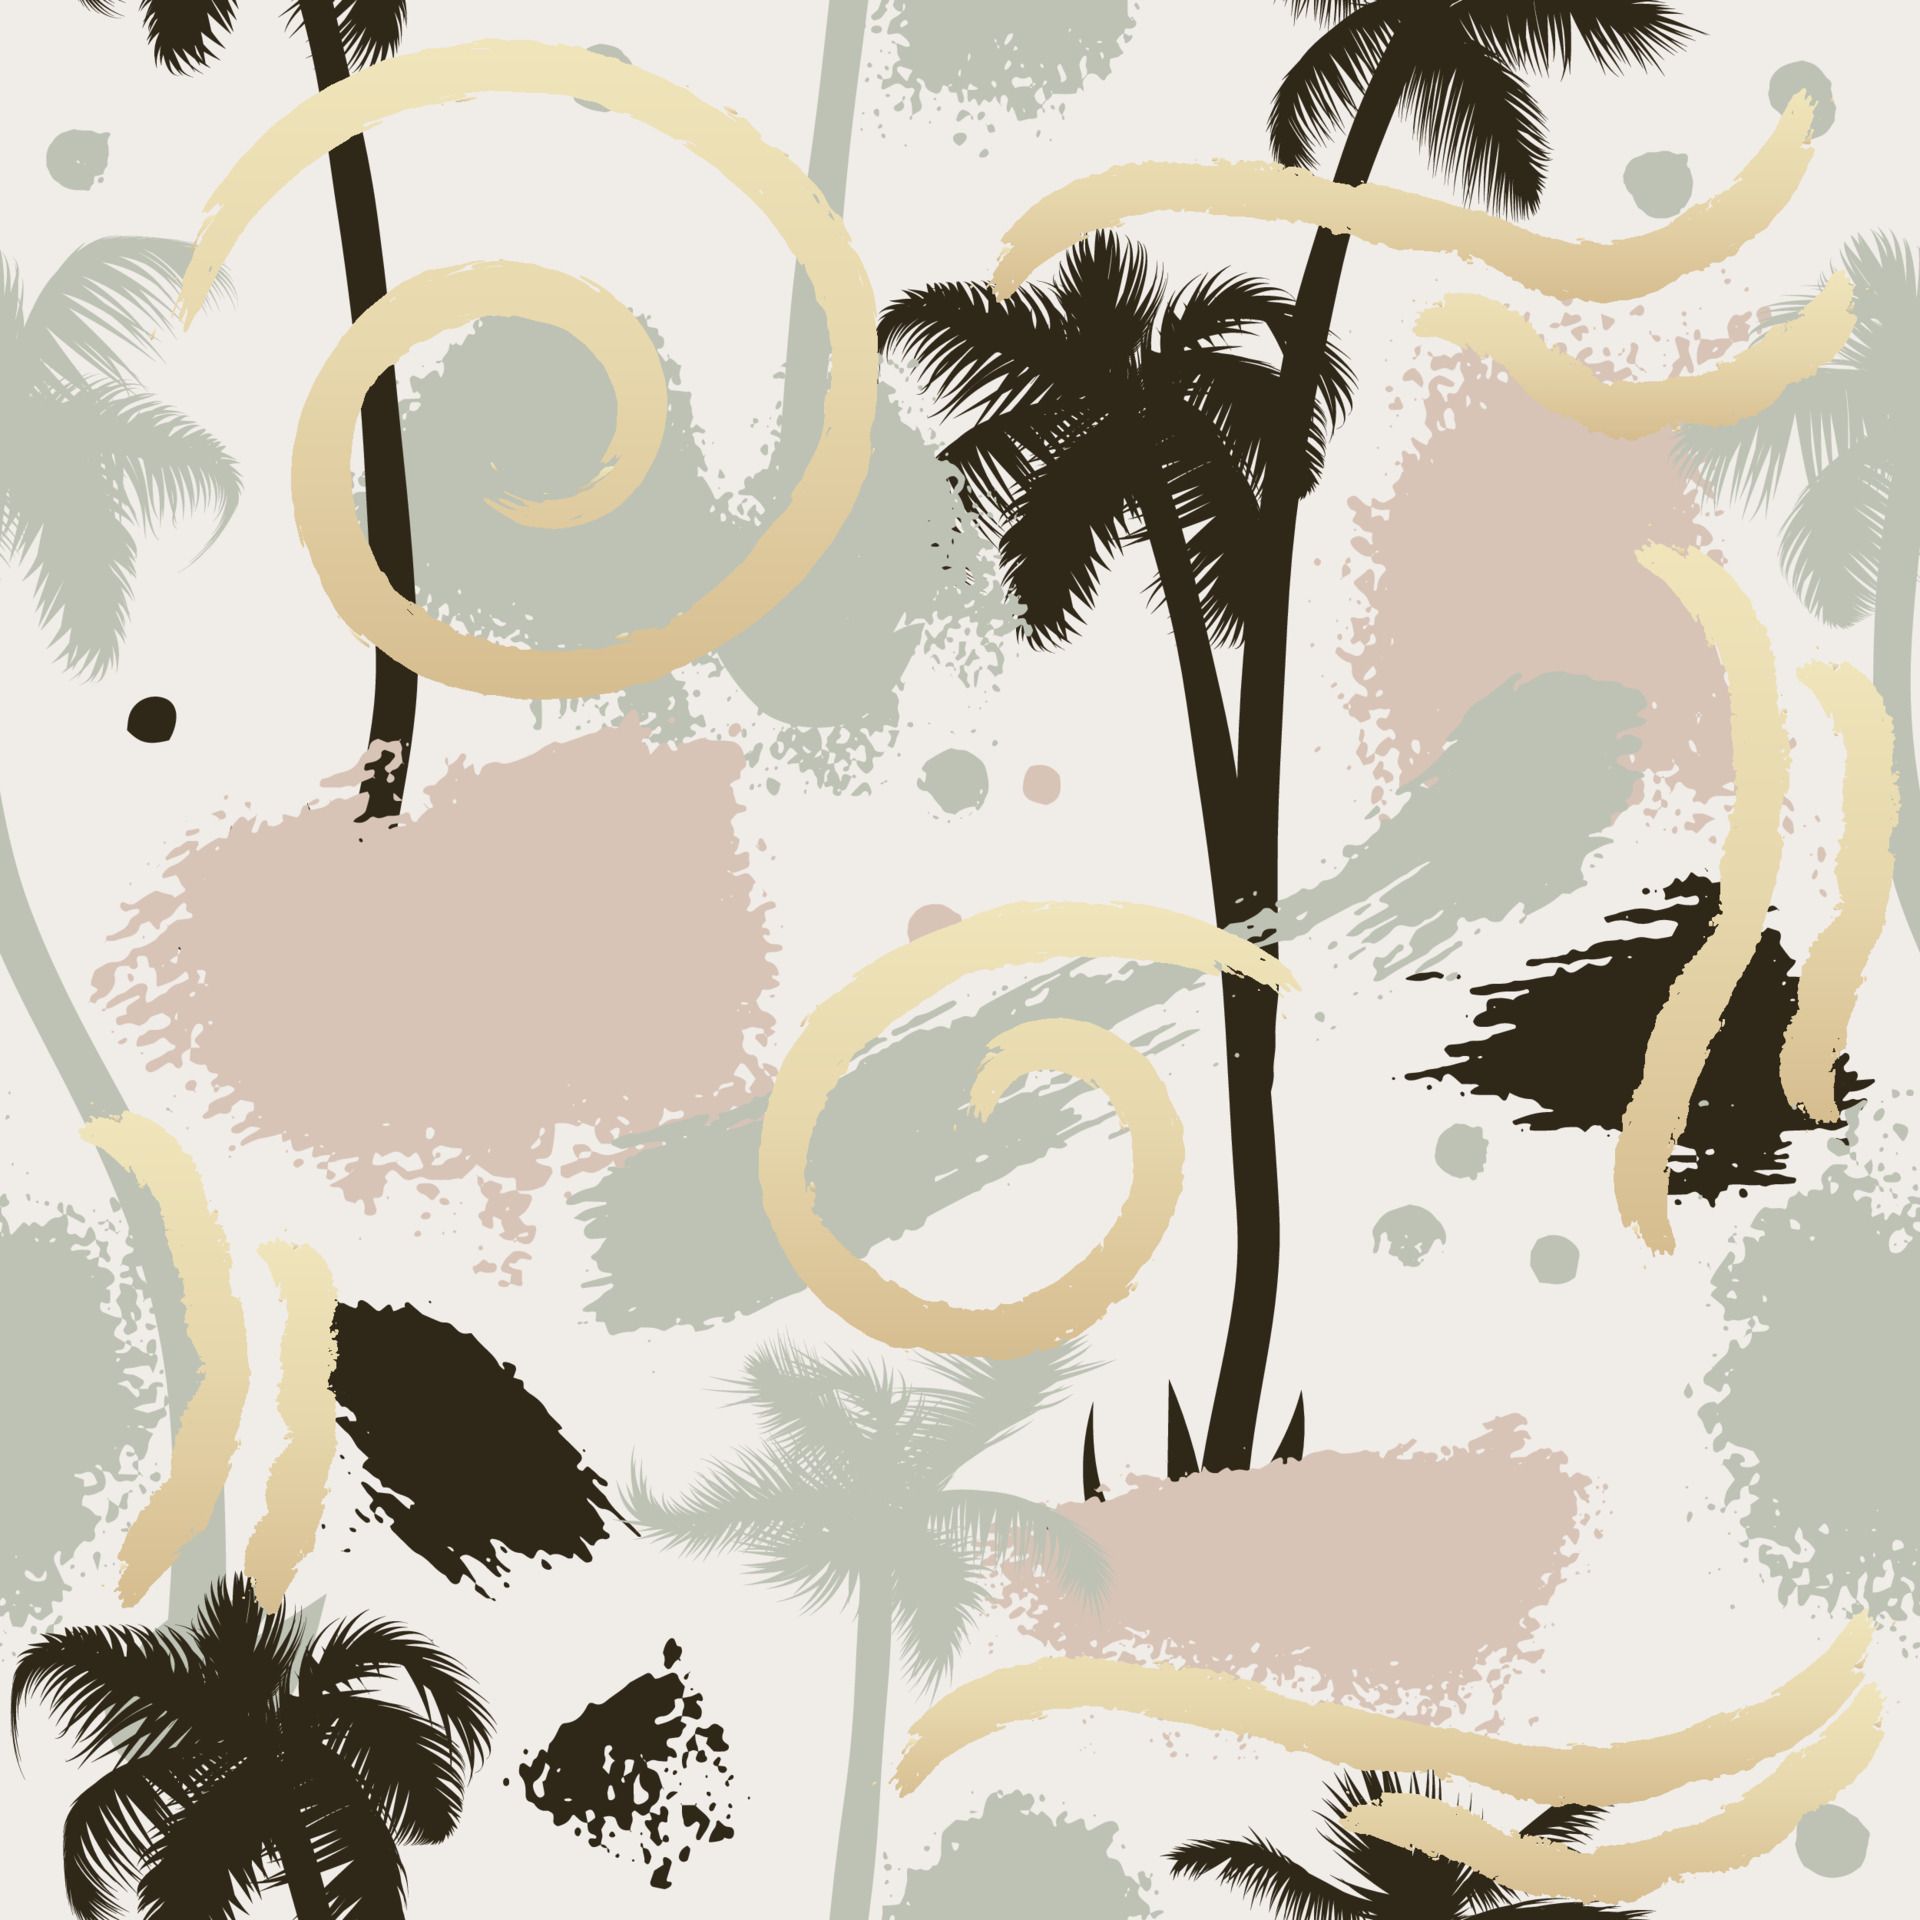 A tropical pattern with palm trees - Palm tree, fashion